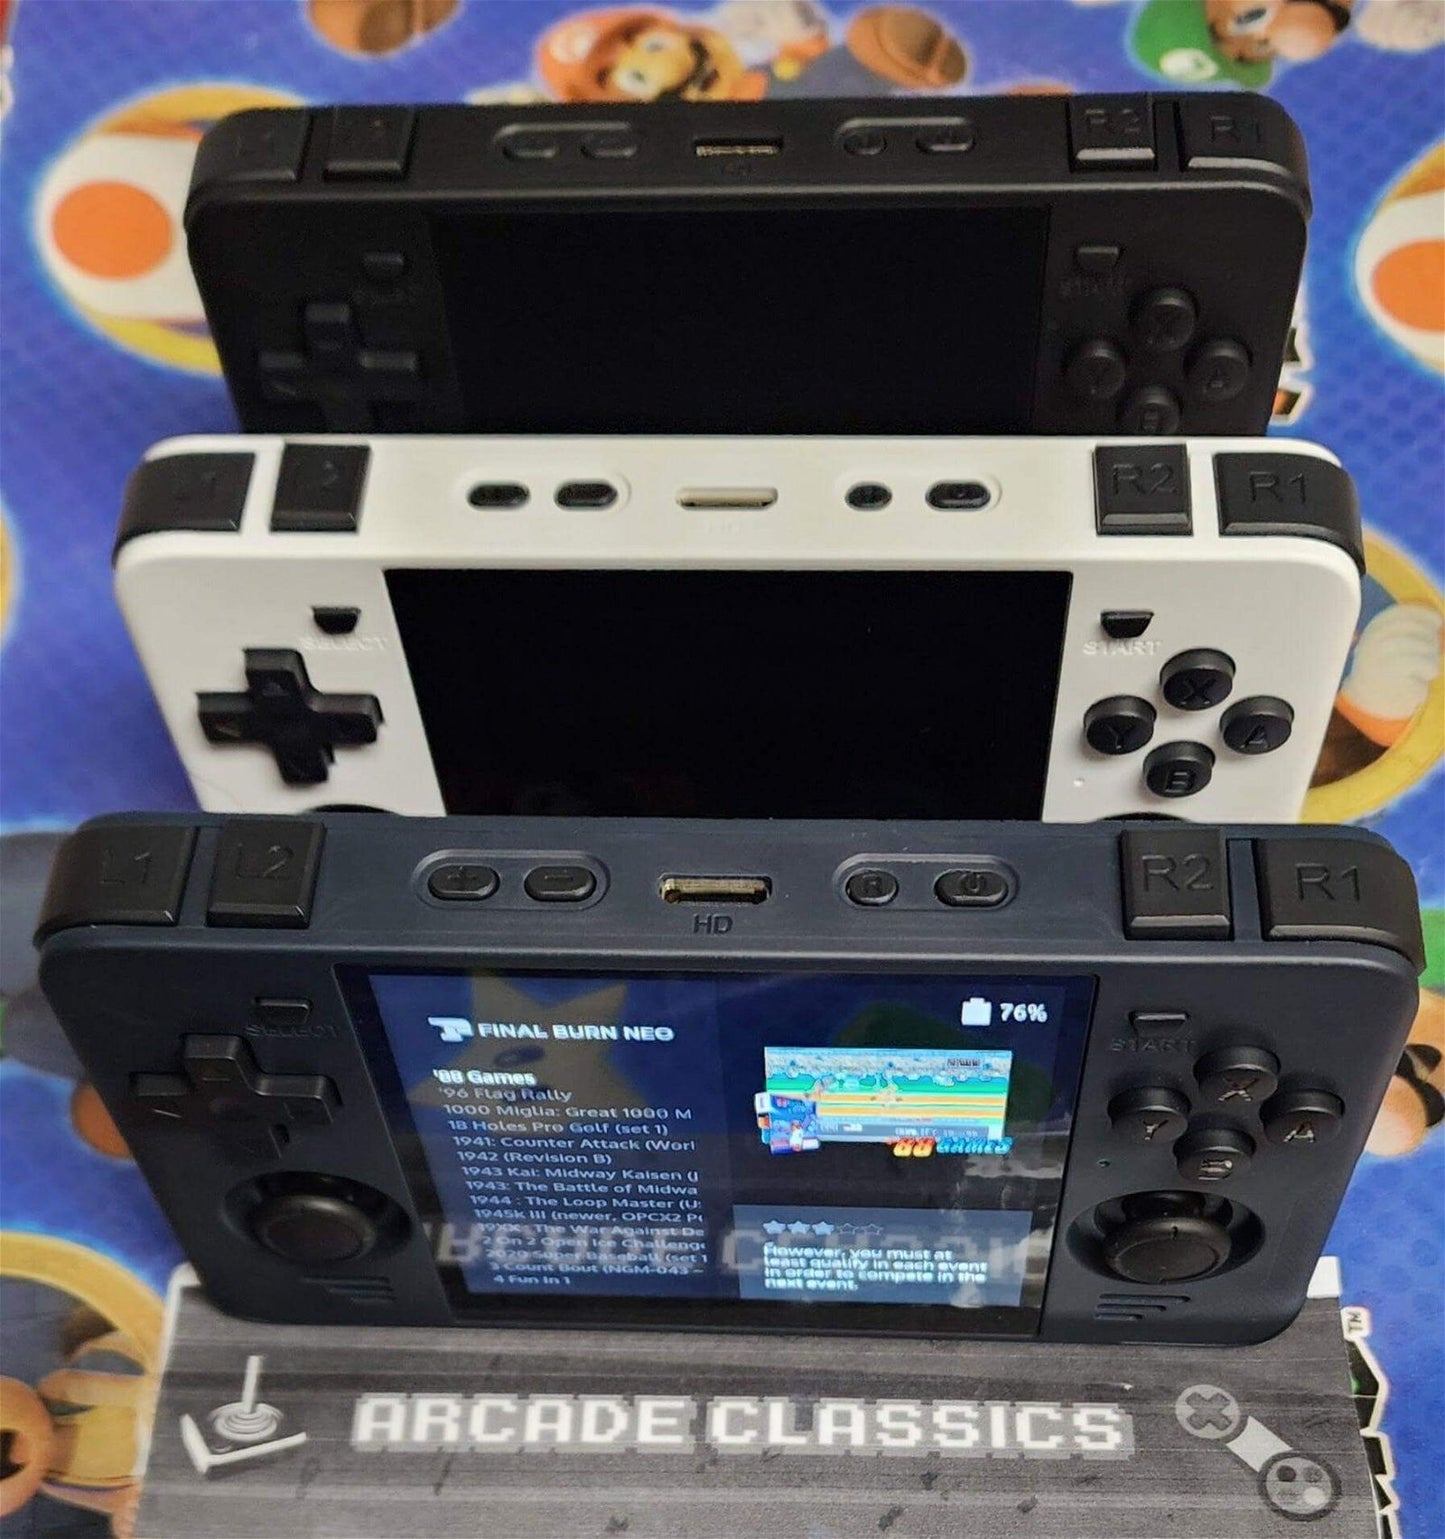 New custom OS software Powkiddy RGB30 with 256GB SD handheld portable gaming console, excellent performance - Arcadeclassics